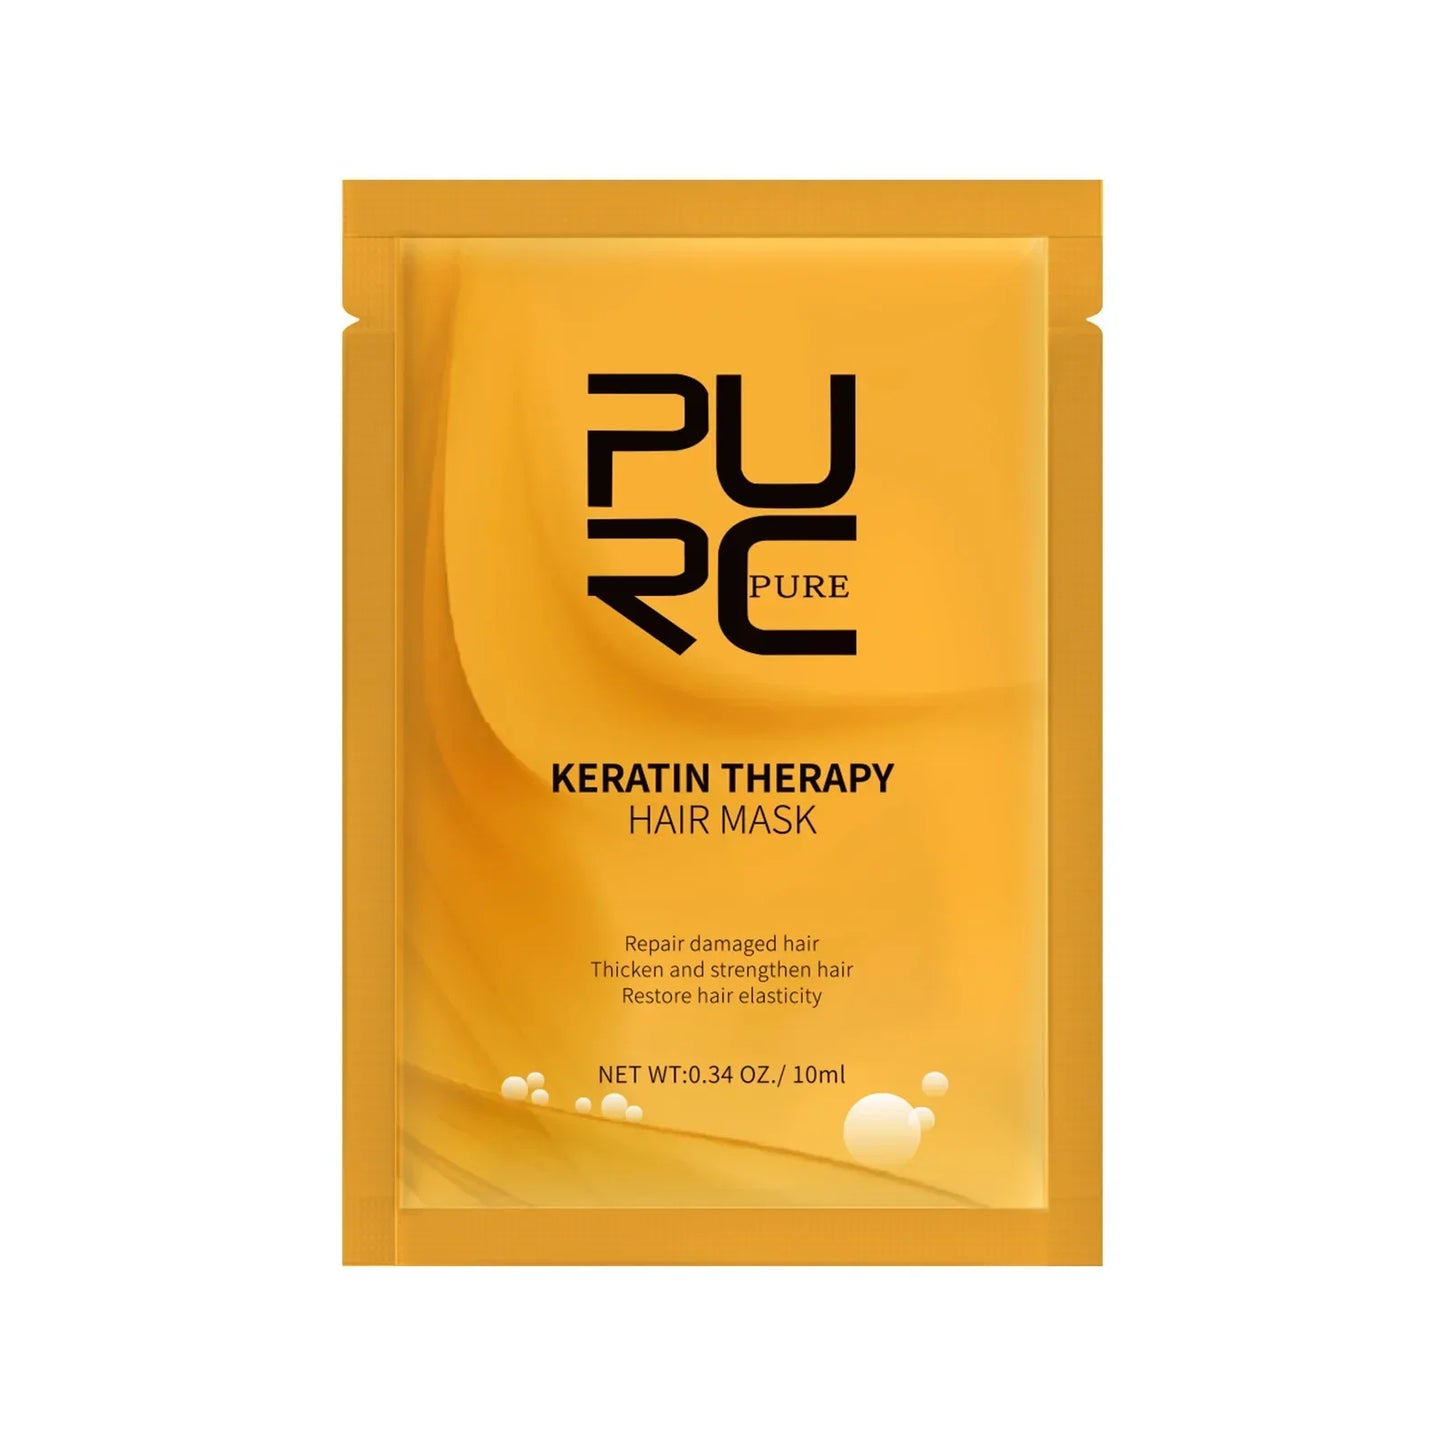 Revive damaged hair with K18 Leave-In Molecular Repair Hair Mask, featuring K18Peptide™ for deep repair and lasting strength, softness, and bounce.